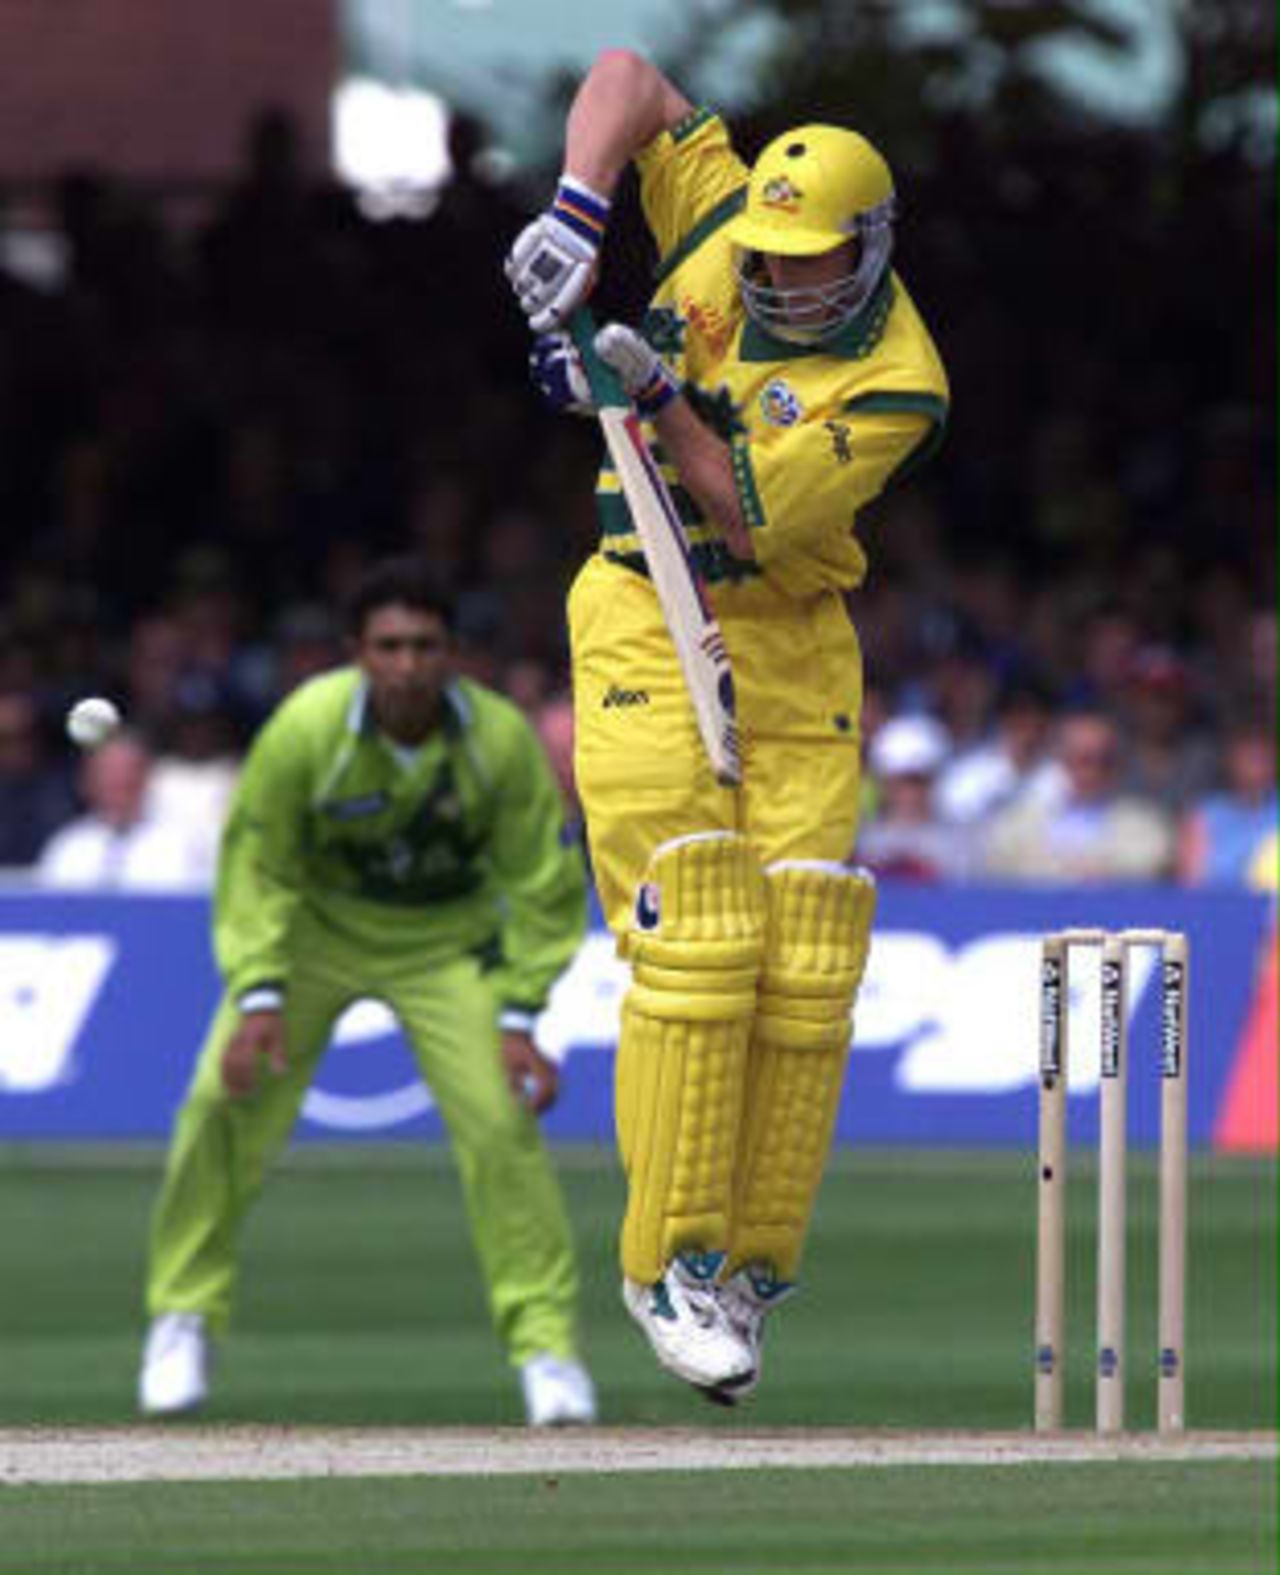 Australian opener Adam Gilchrist on his way to fifty in thirty-three balls against Pakistan in the World Cup Cricket final at Lord's 20 June 1999.